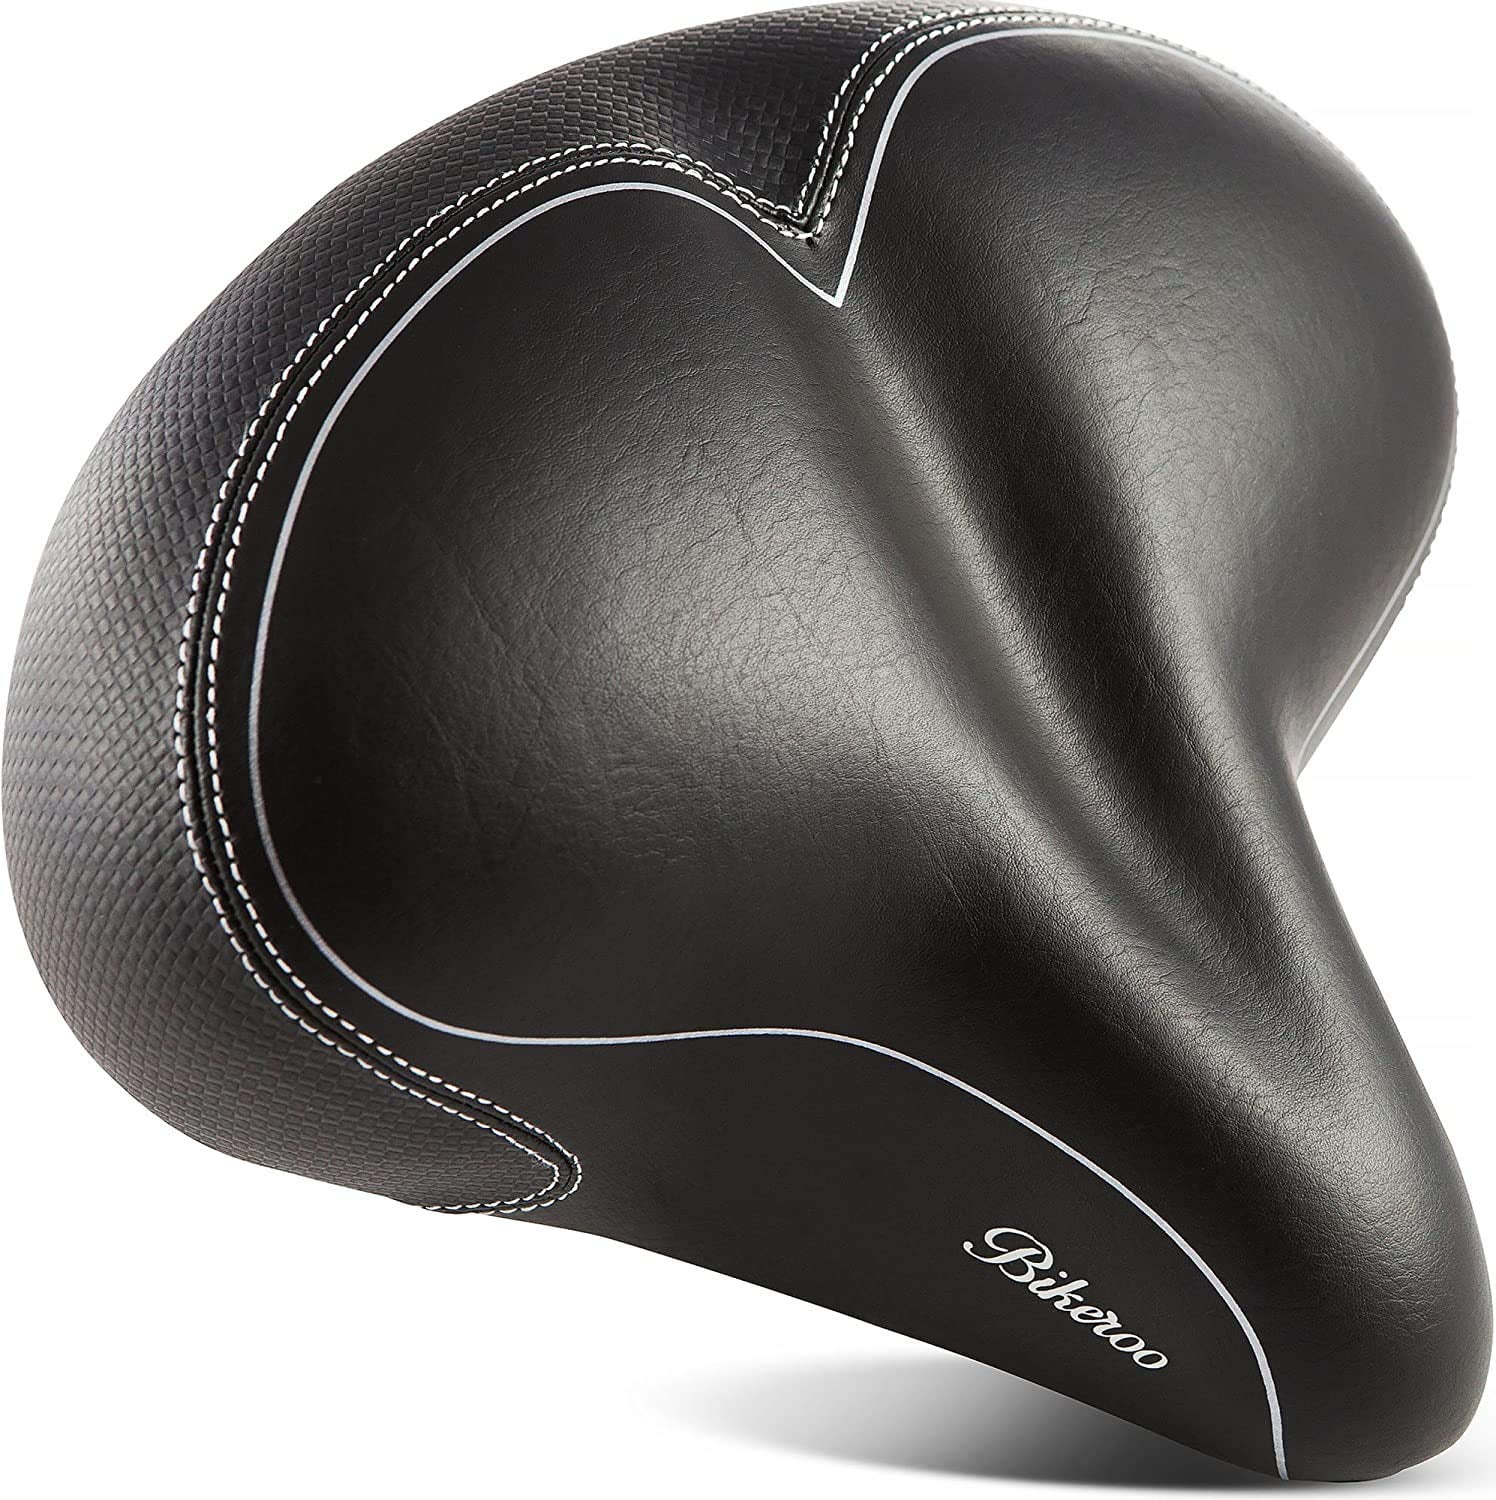 Large Exercise Gel Seat Cover New By Bikeroo...Brand New Stock... 